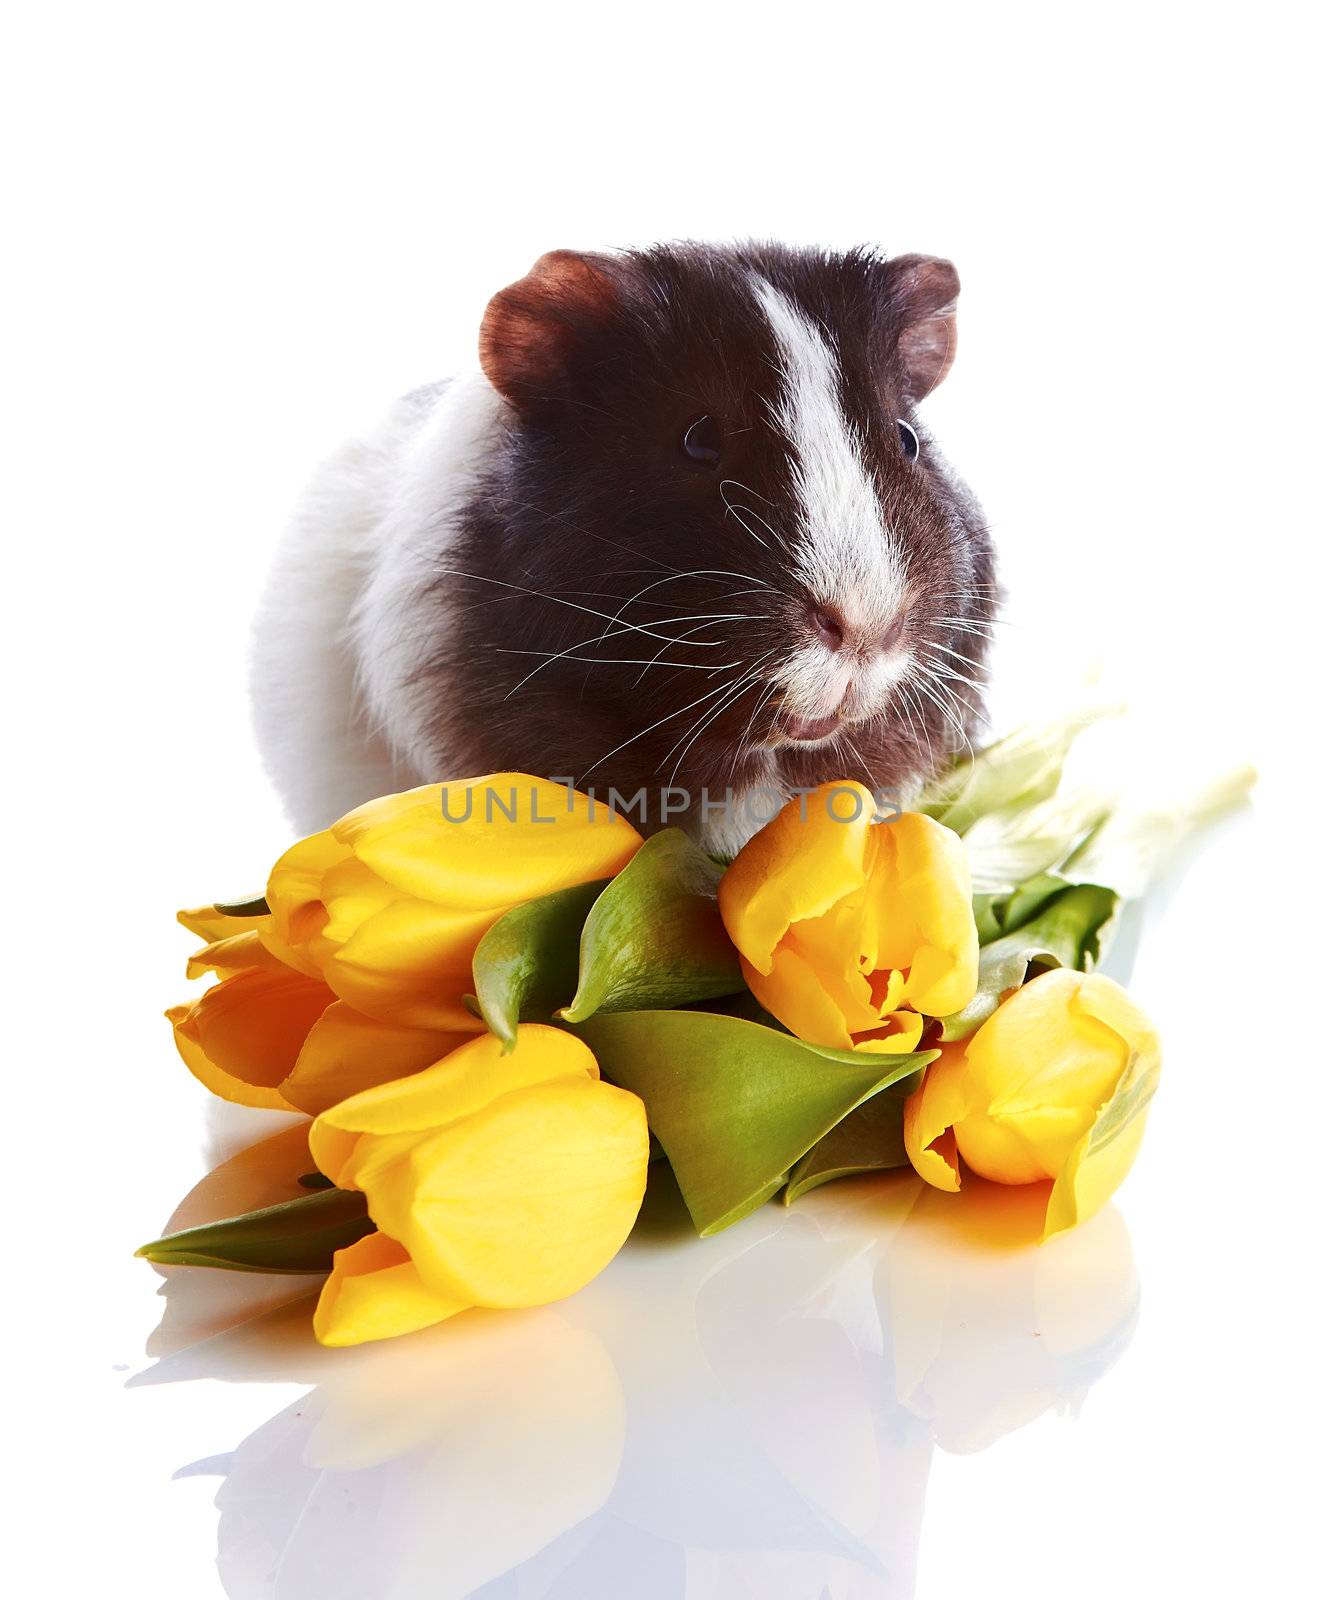 Guinea pig with tulips. Guinea pig and flowers. Small pet. Live gift.